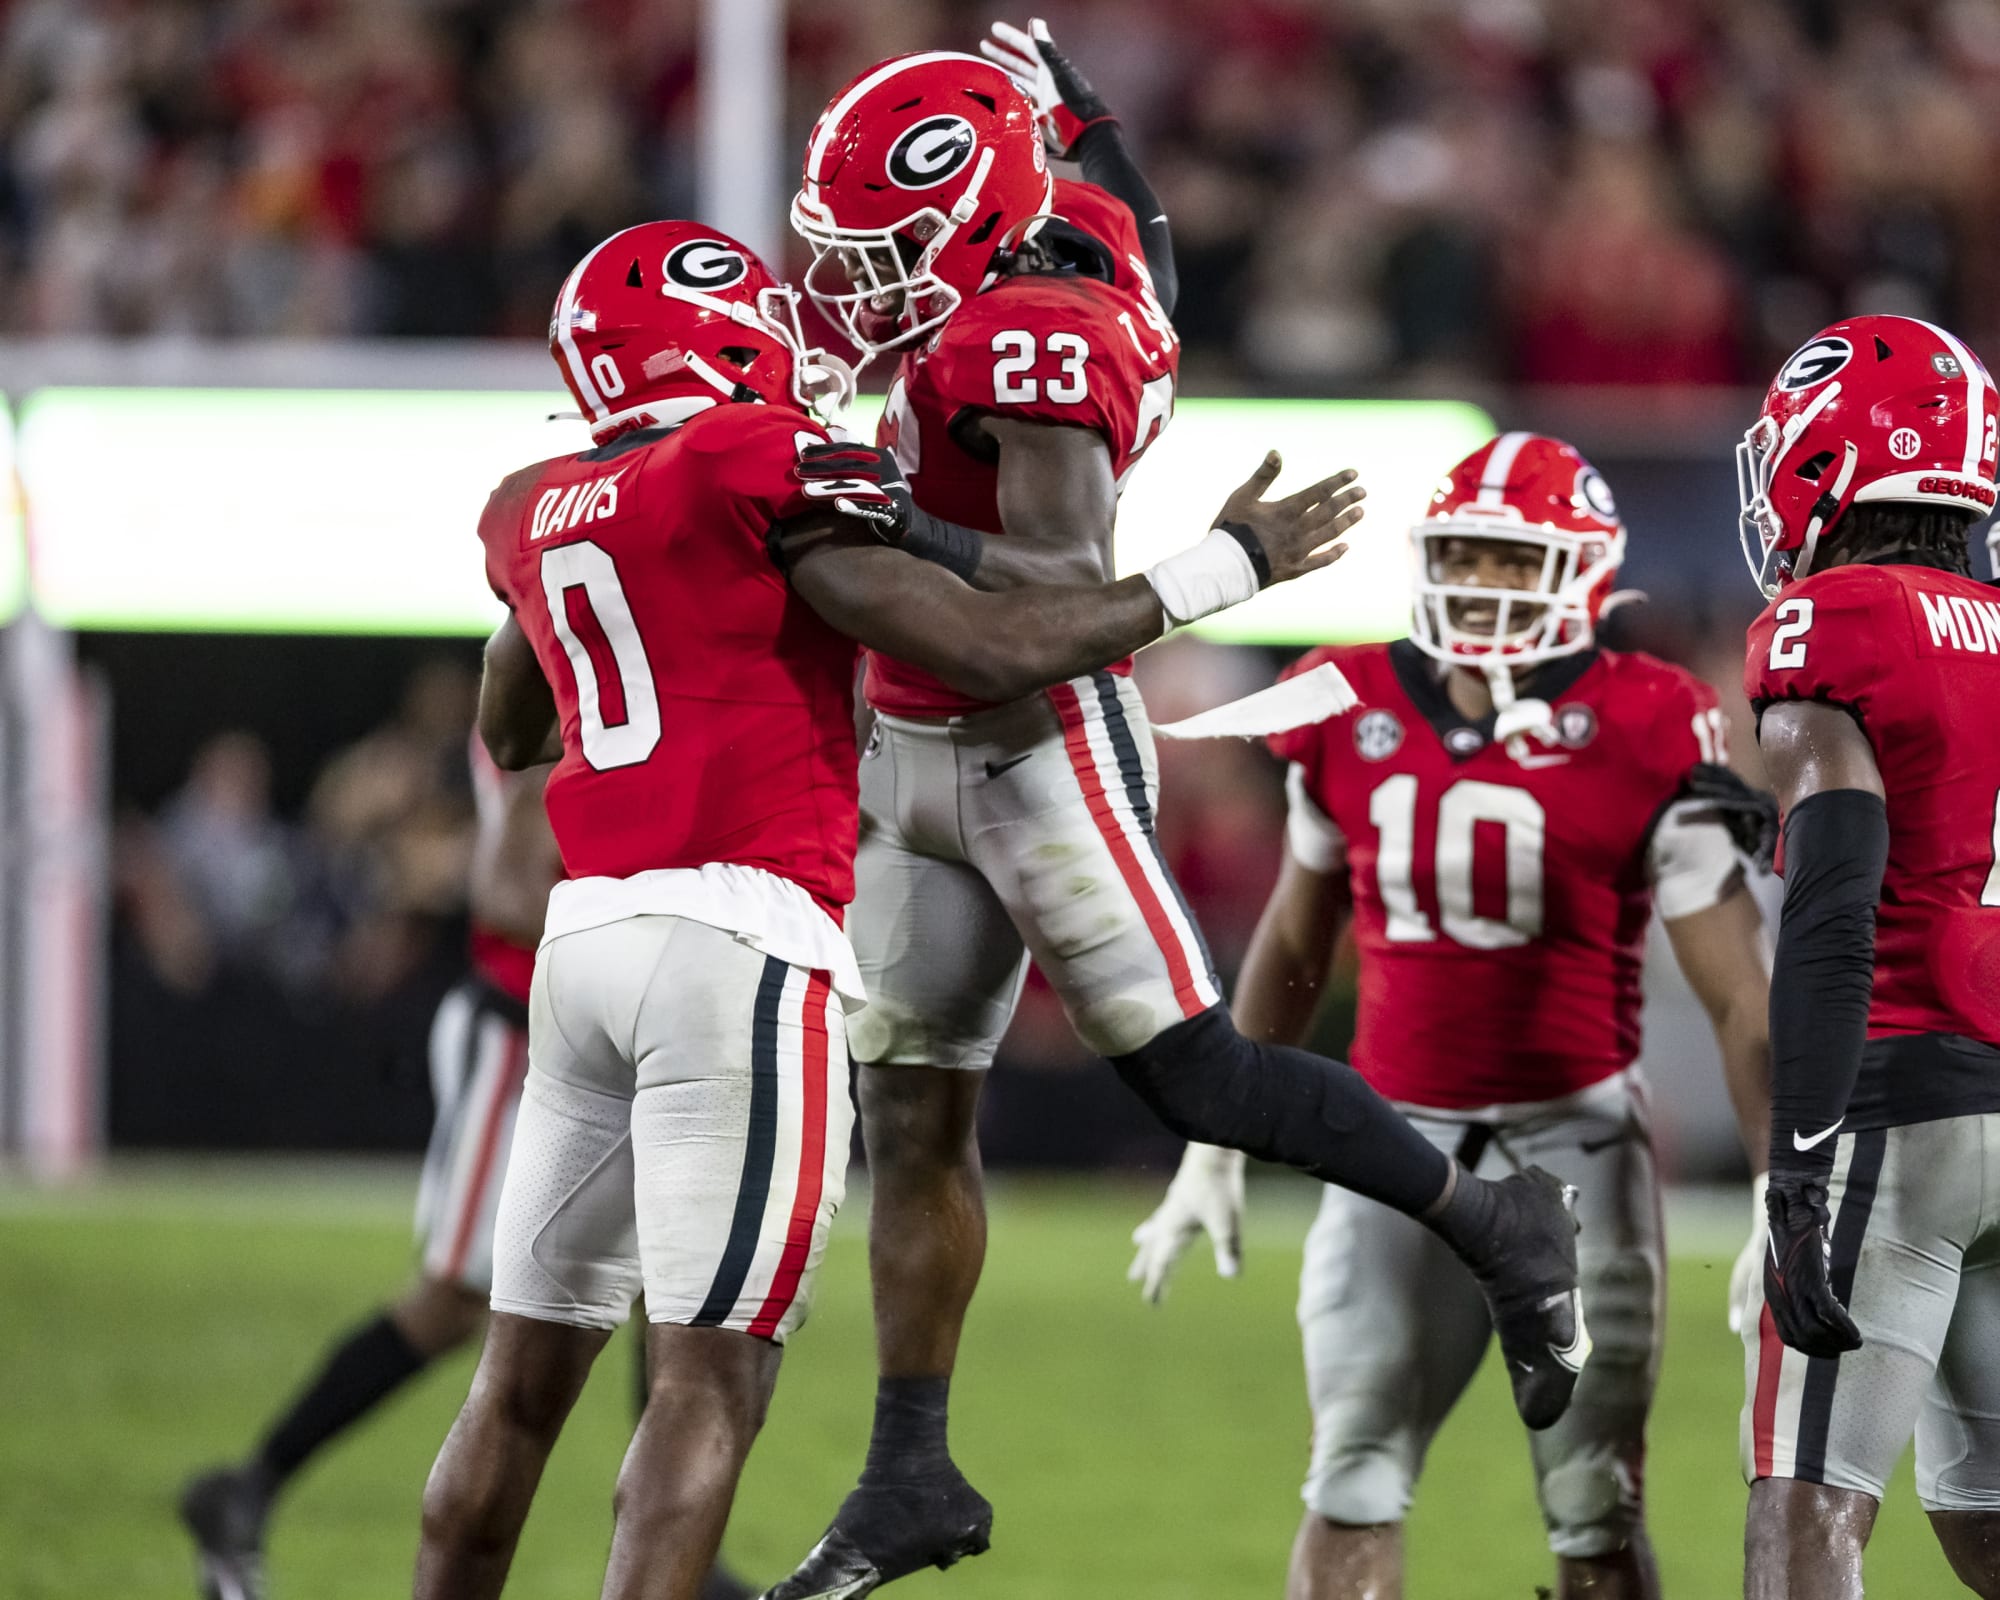 College Football Playoff Rankings 2022 Projected Top 25 for Week 11